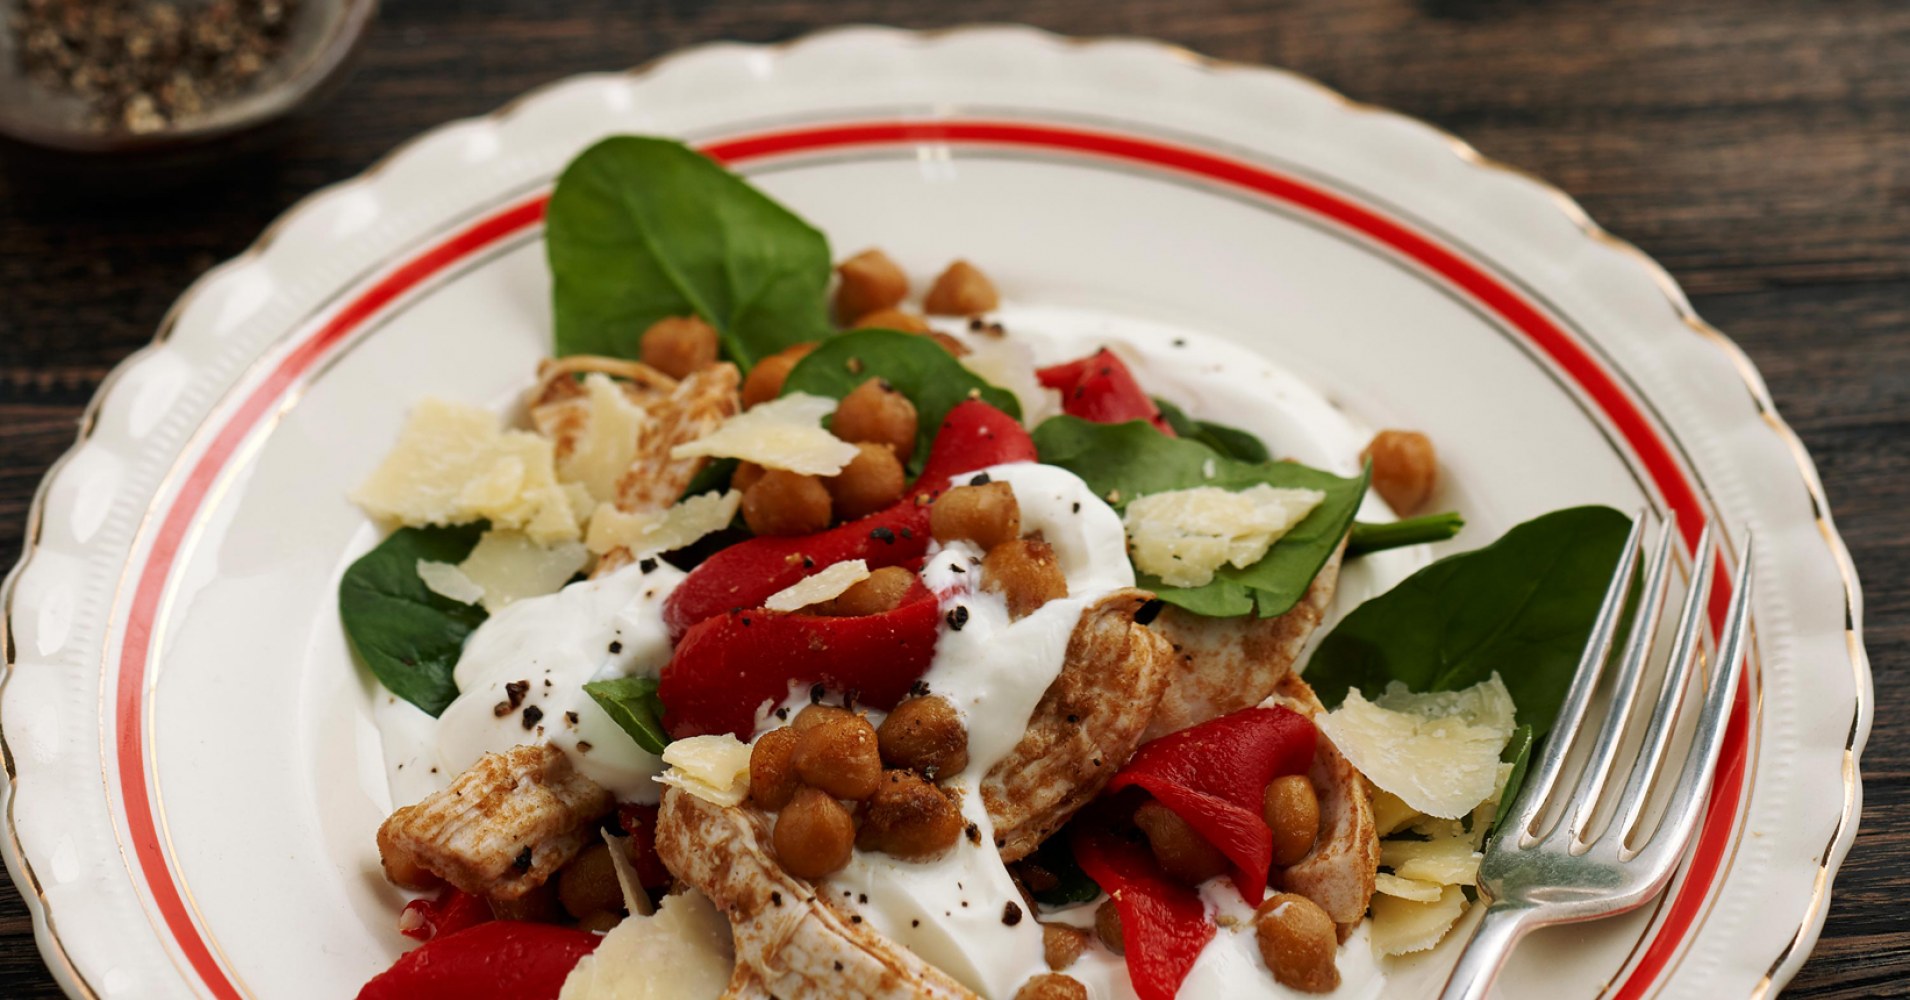 Spiced Chickpea, Chicken and Spinach Salad Recipe | myfoodbook